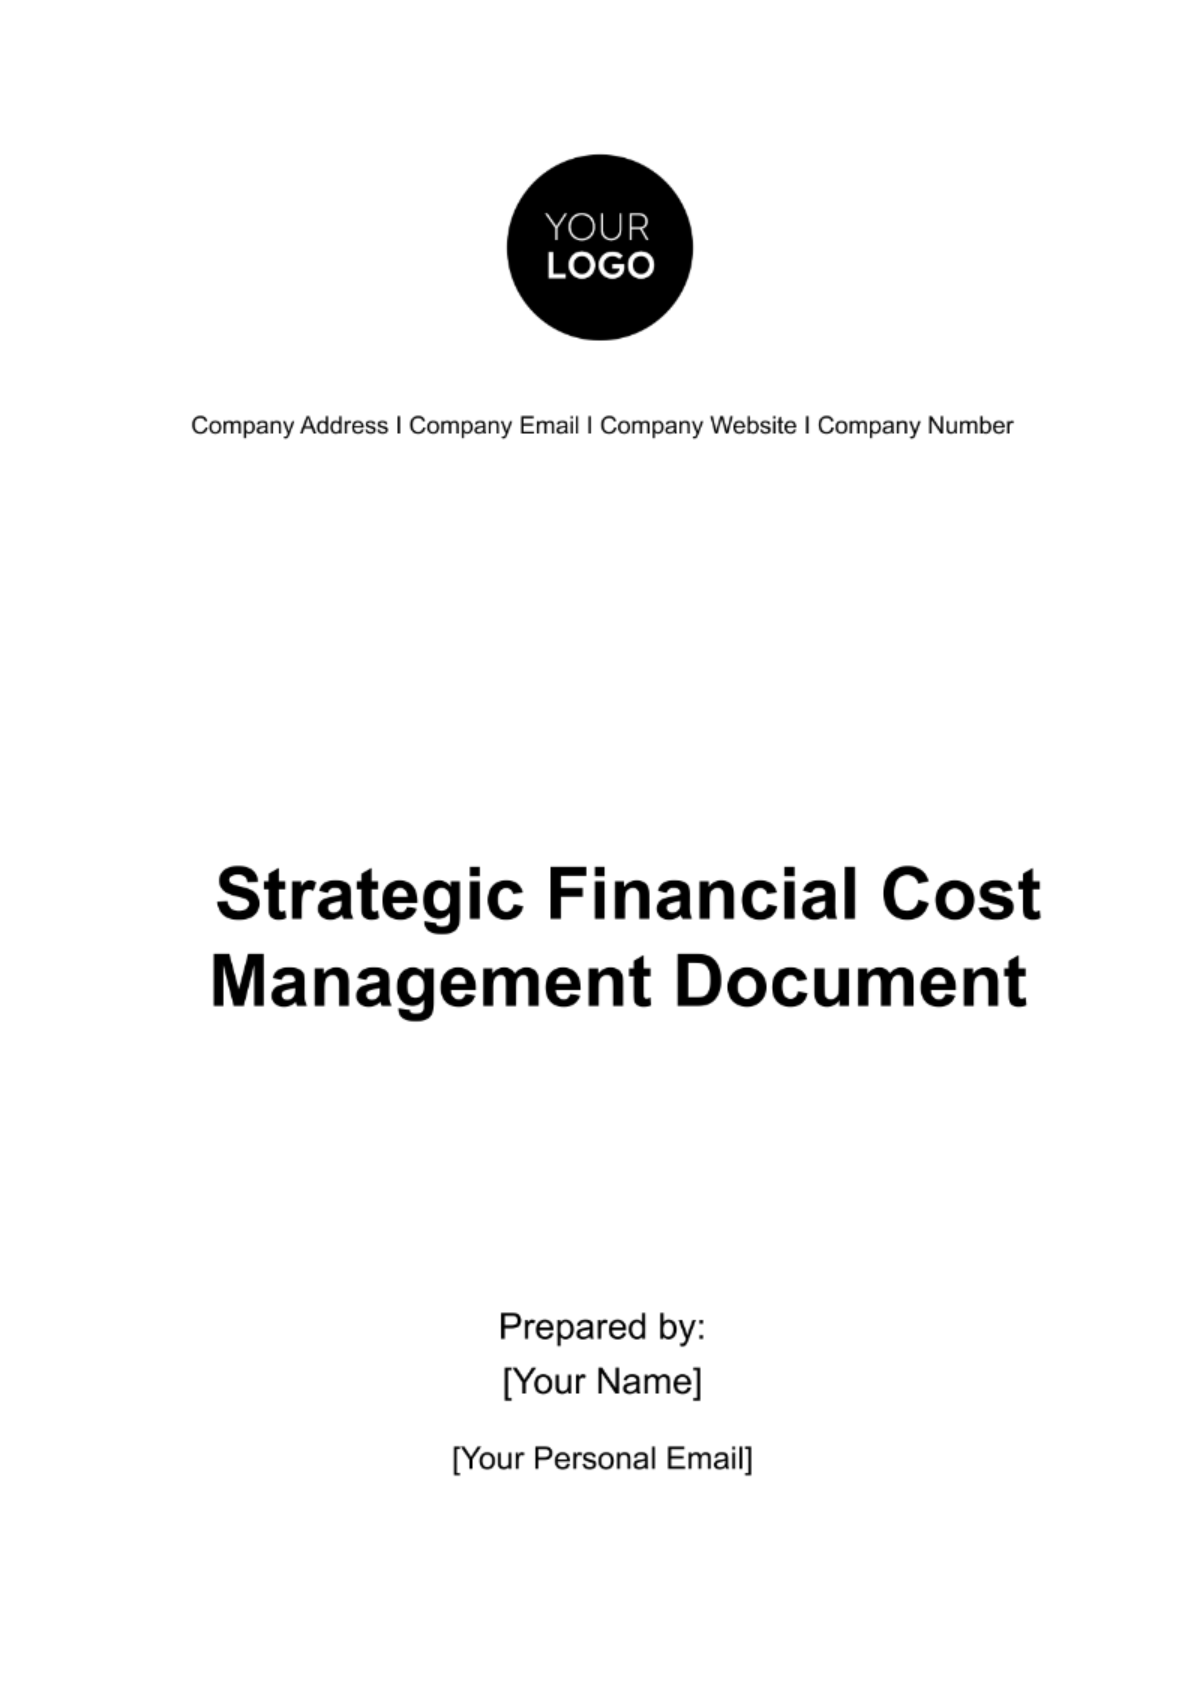 Strategic Financial Cost Management Document Template